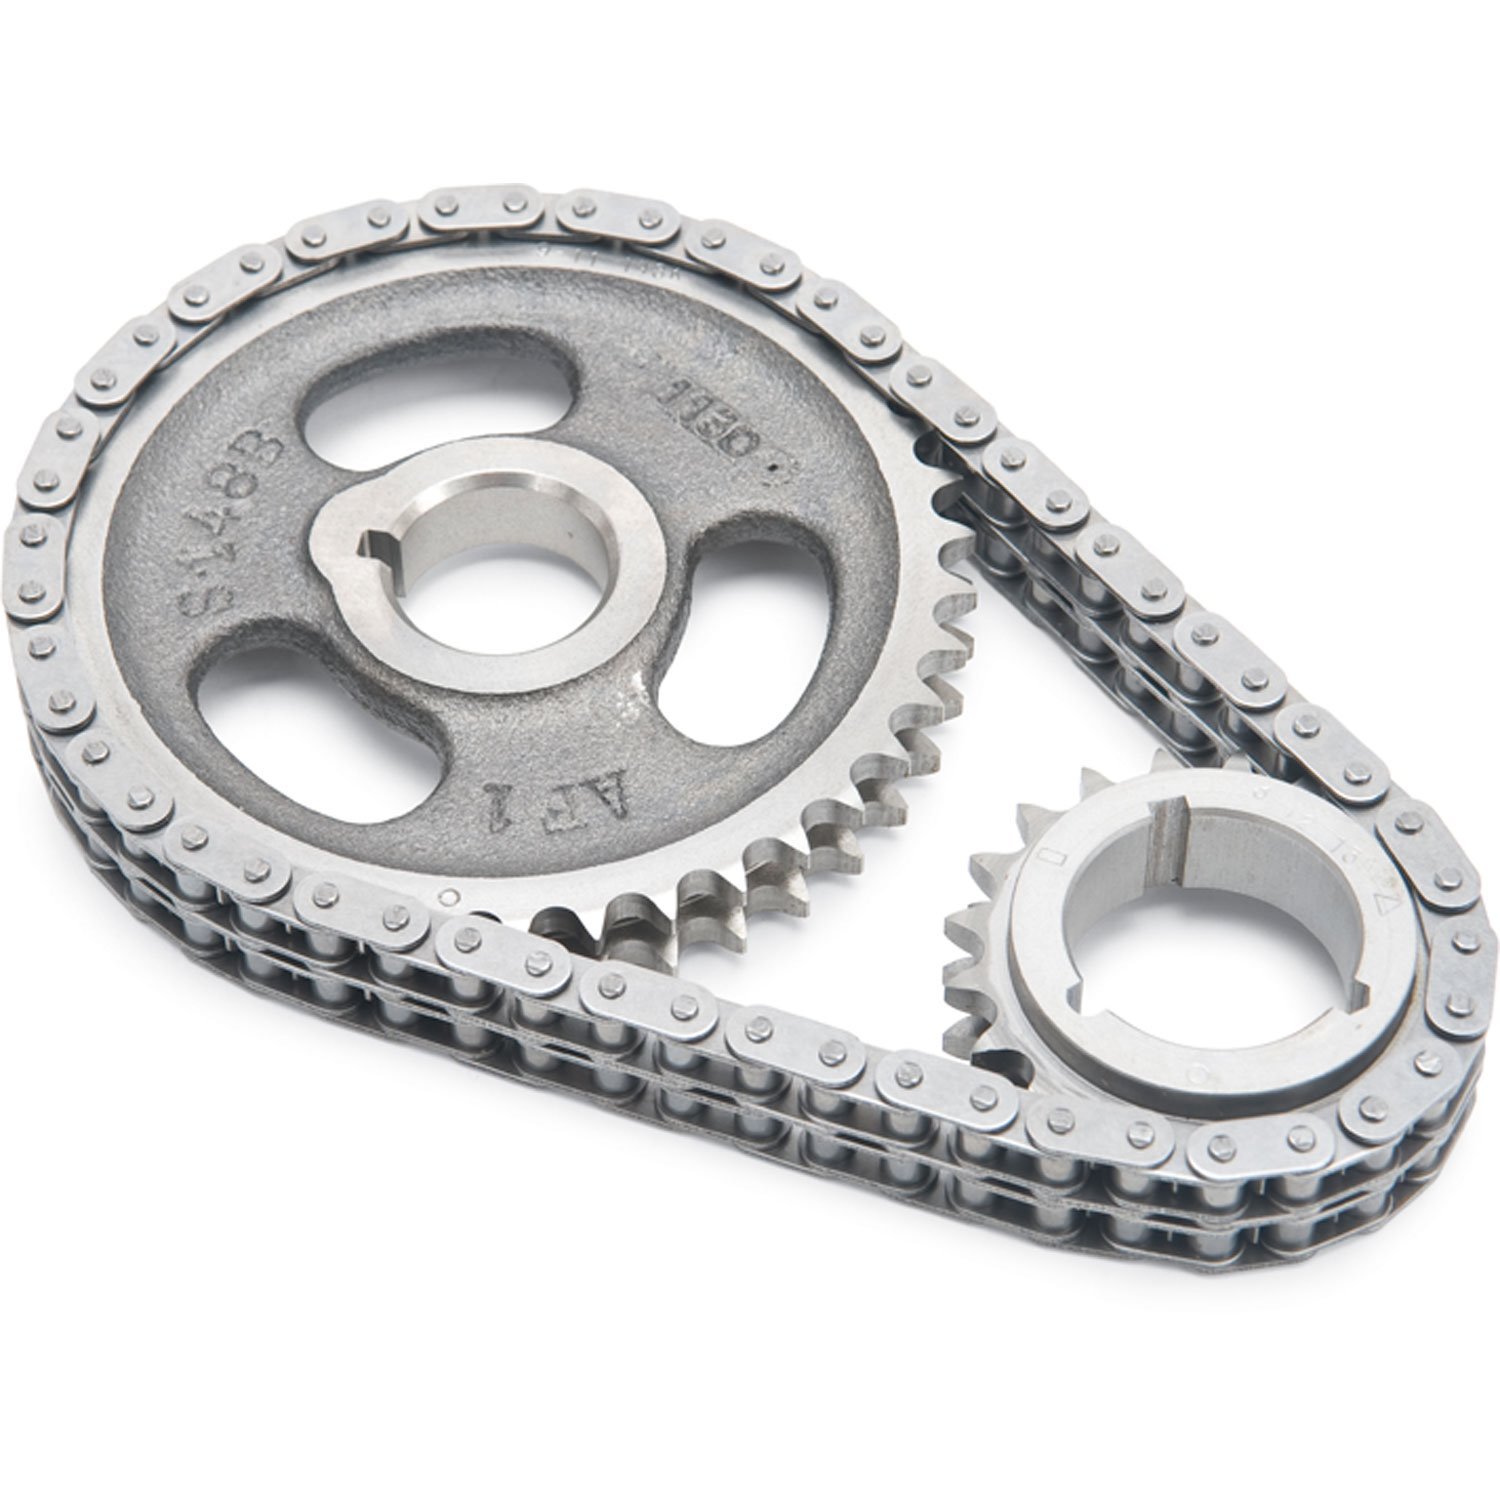 Performer-Link Timing Chain Set for Buick, Oldsmobile, and Pontiac with 215 Aluminum V8 and 231 V6